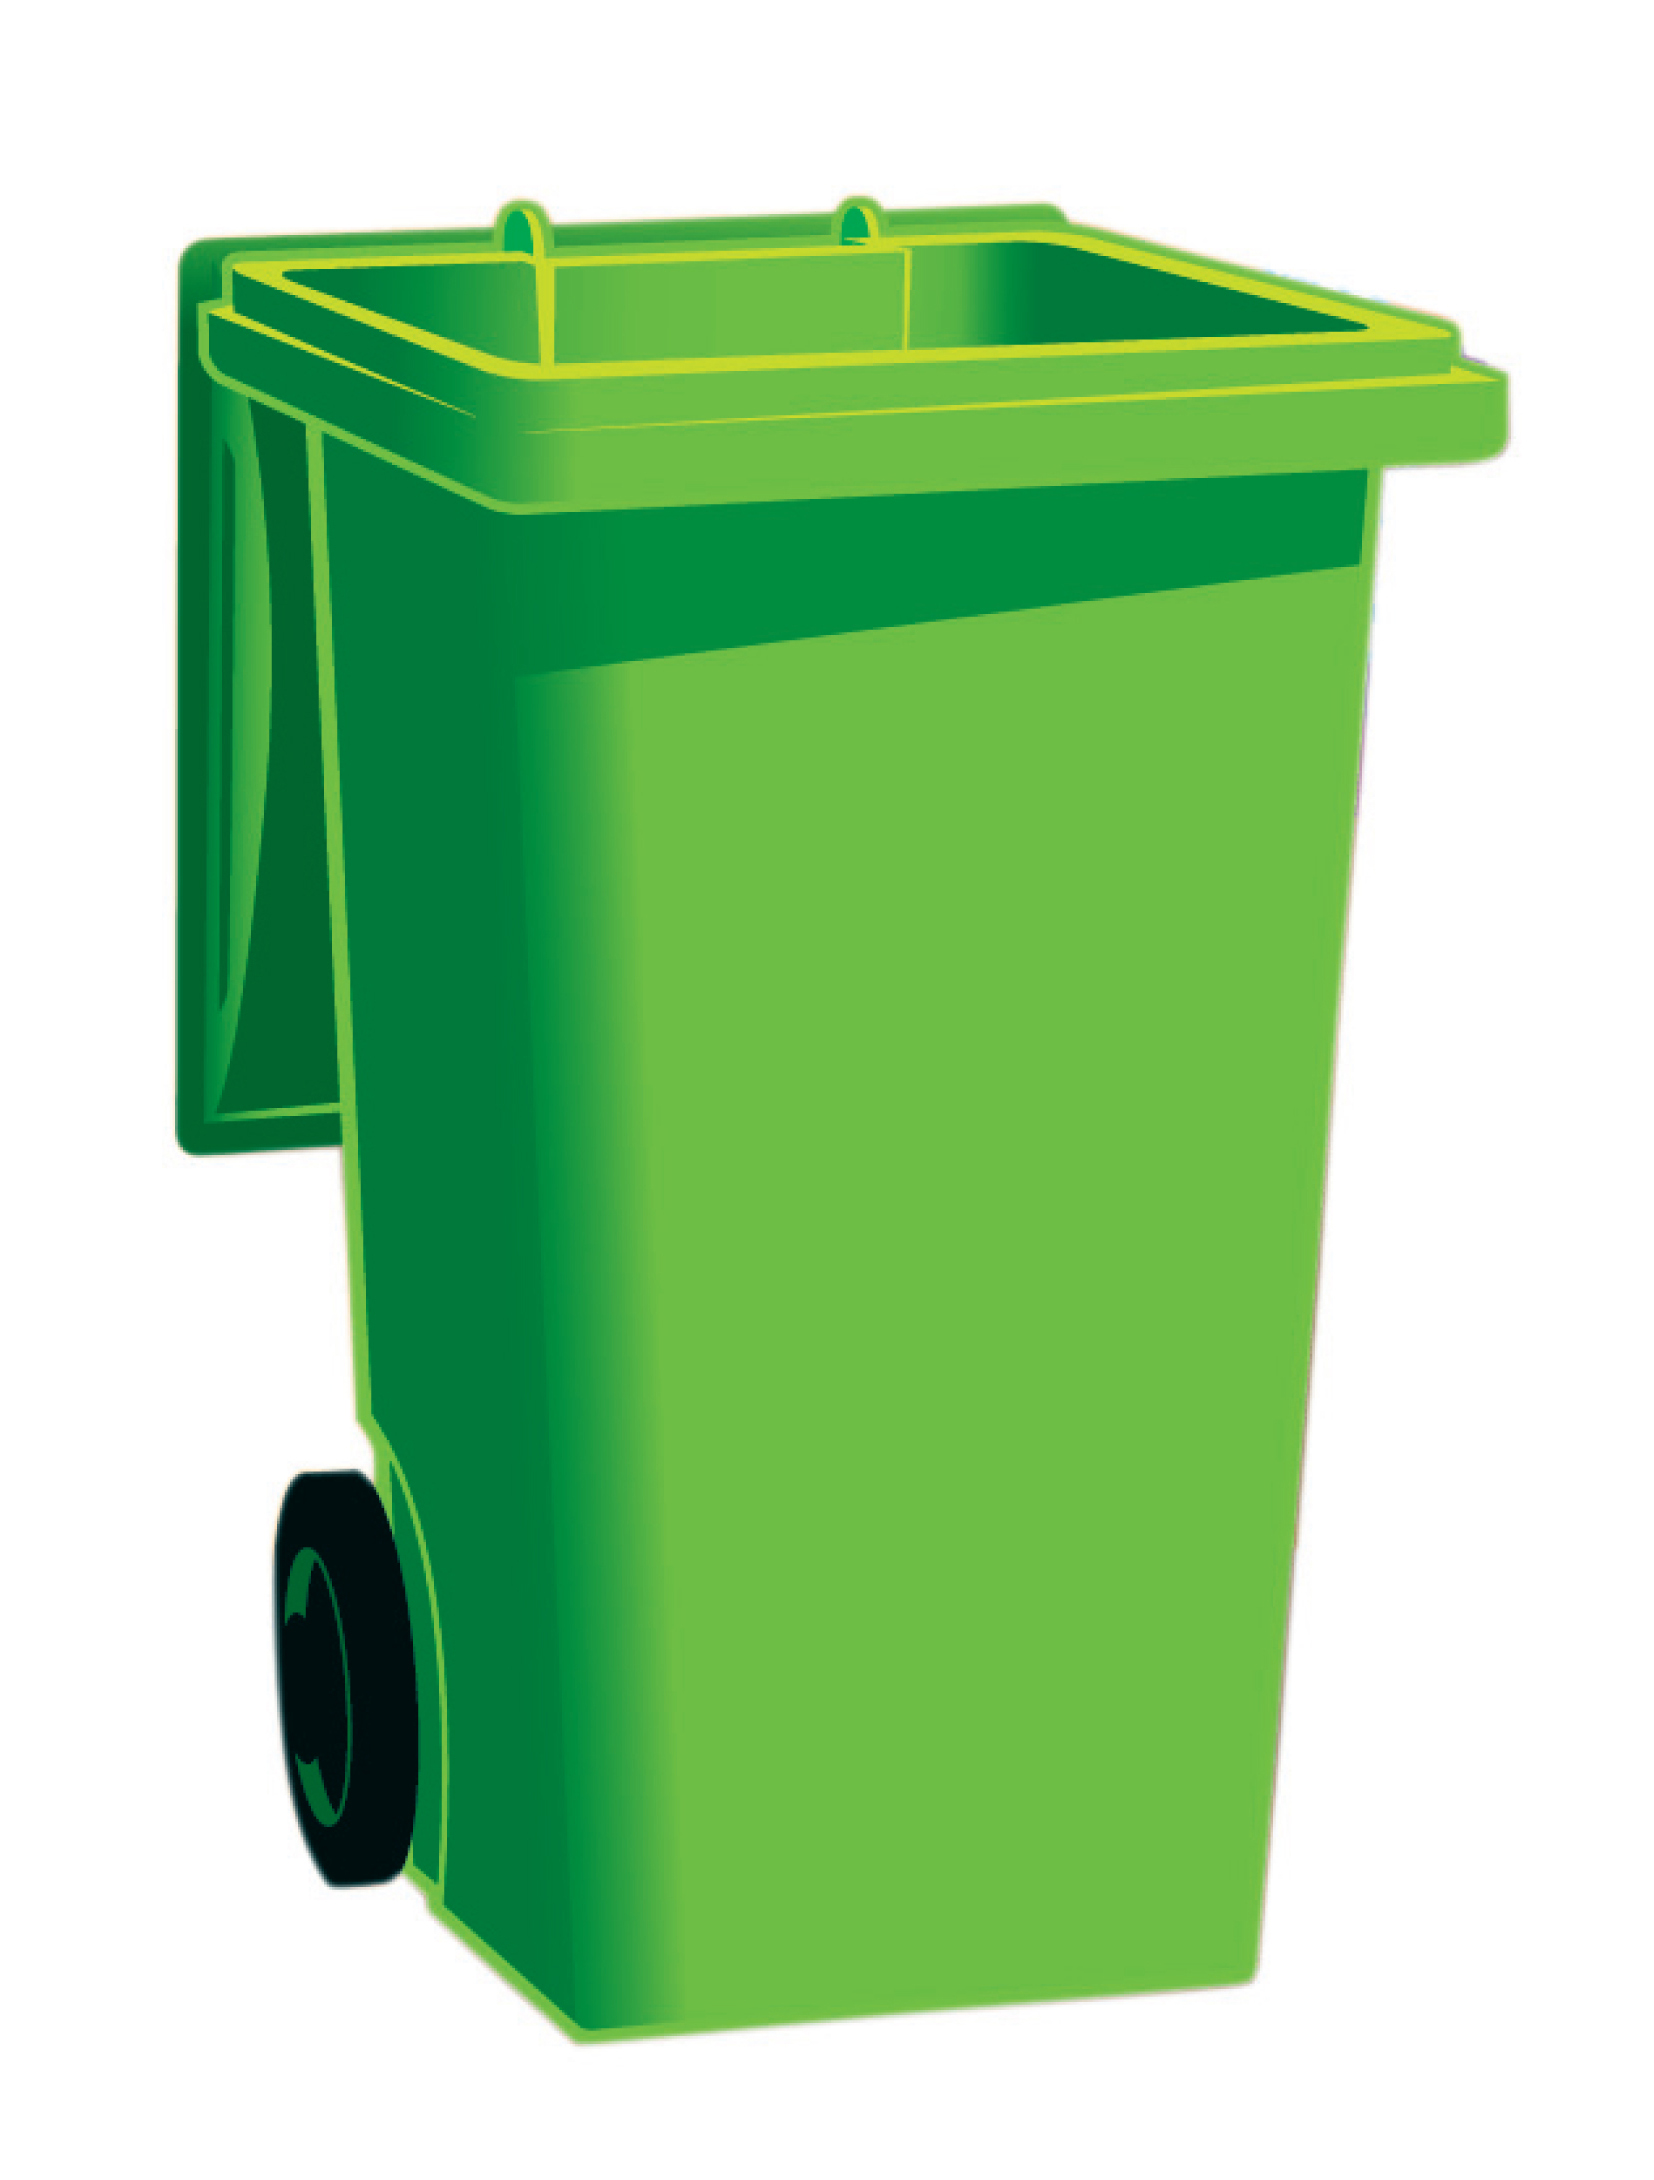 Recycle Bin Pictures   Clipart Best